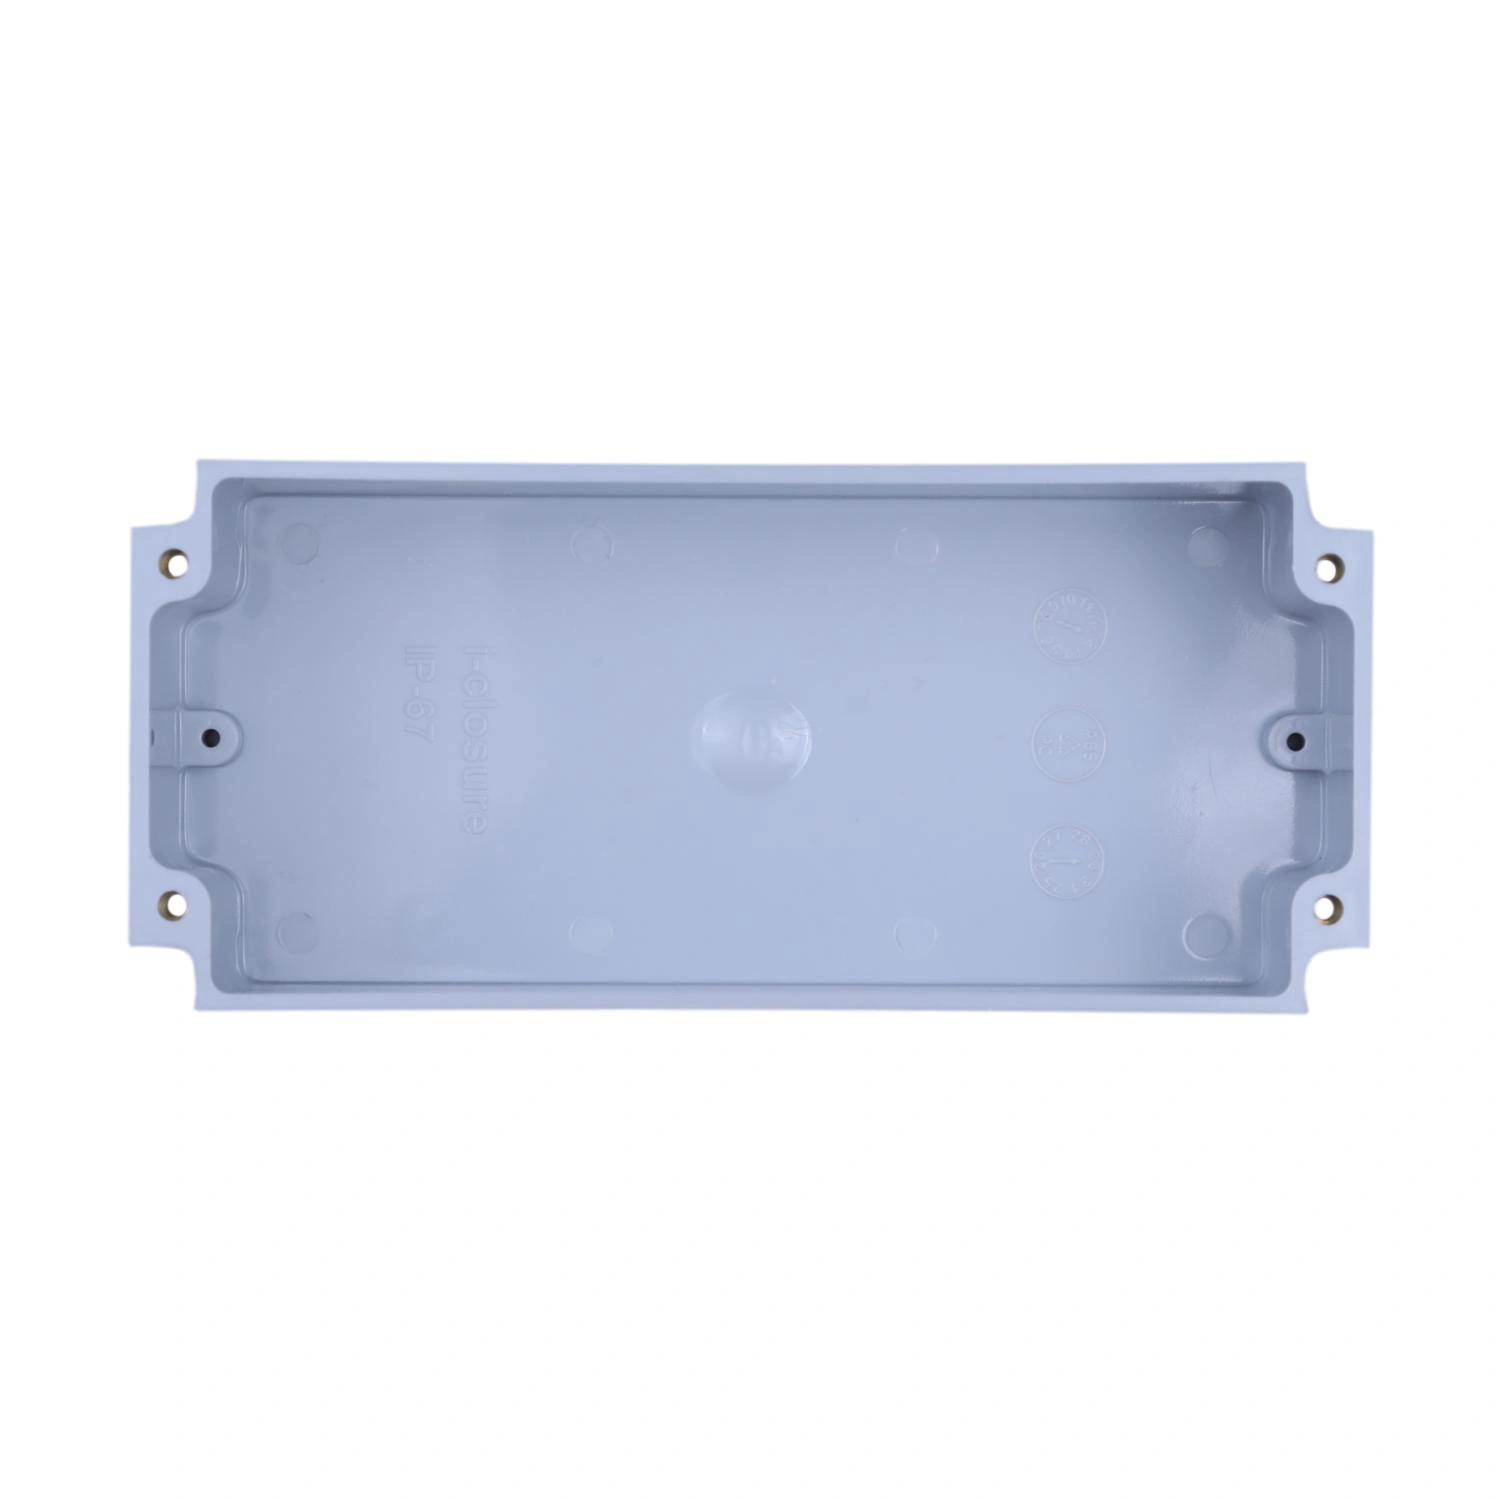 ABS Enclosure 180 x 80 x 55 mm Clear IP67-1